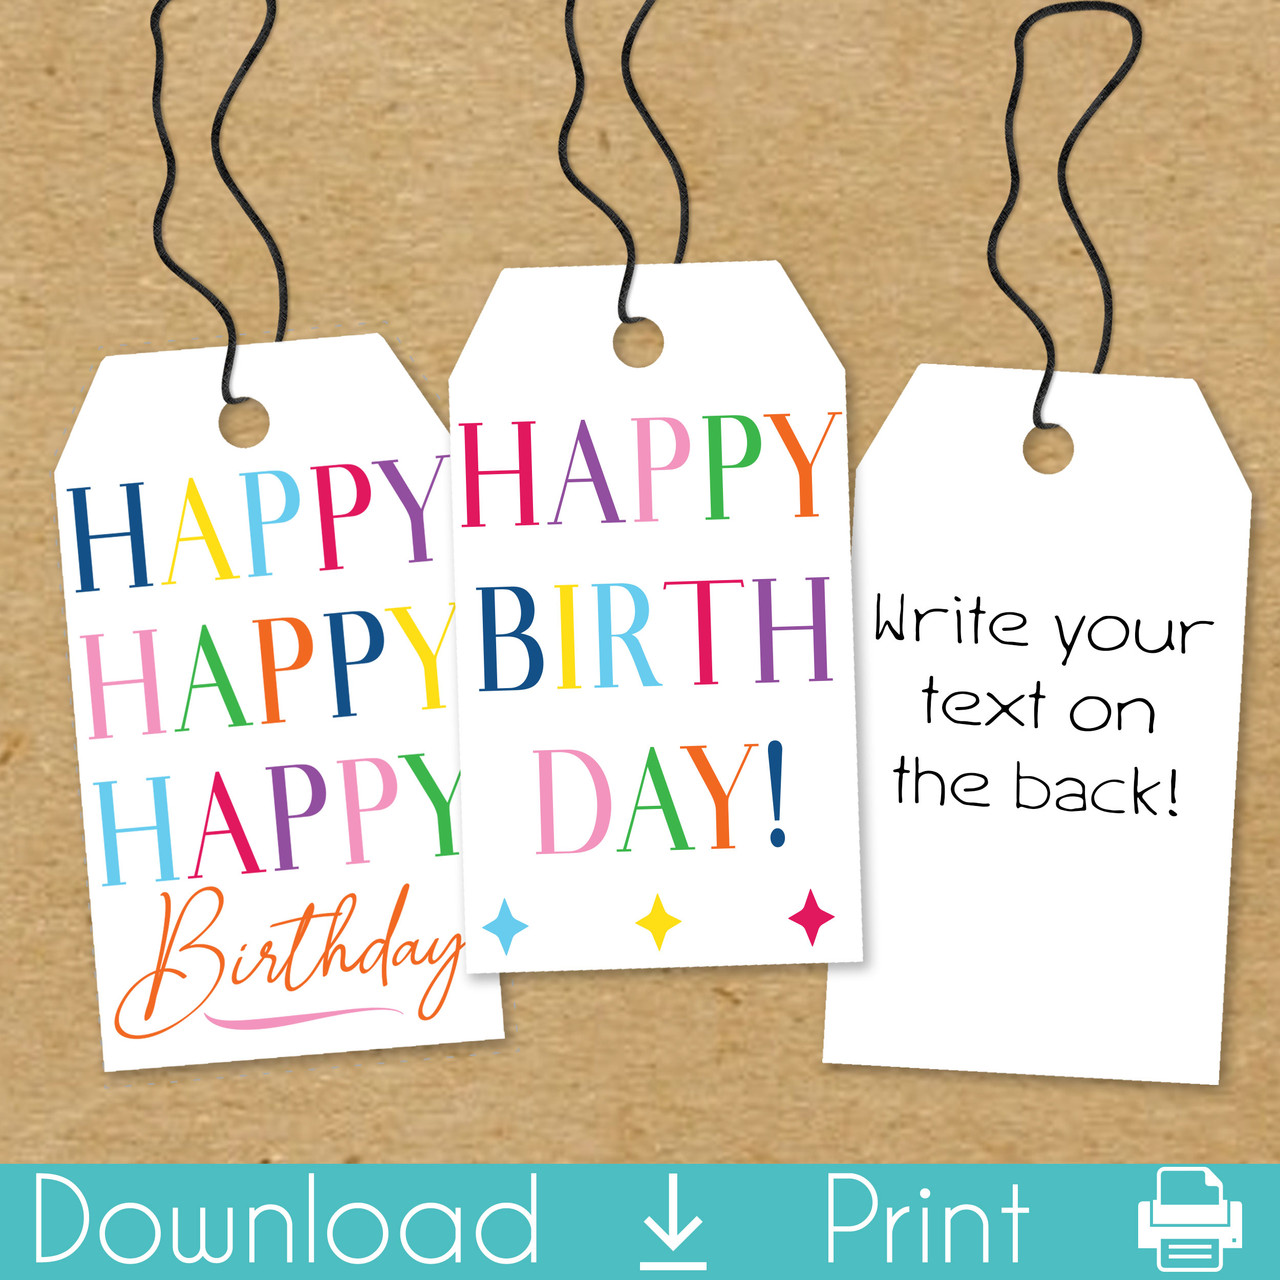 Free Printable Gift Tags and Wrap Paper  Birthday gift tags printable,  Free printable gift tags, Free printable gift tags birthday